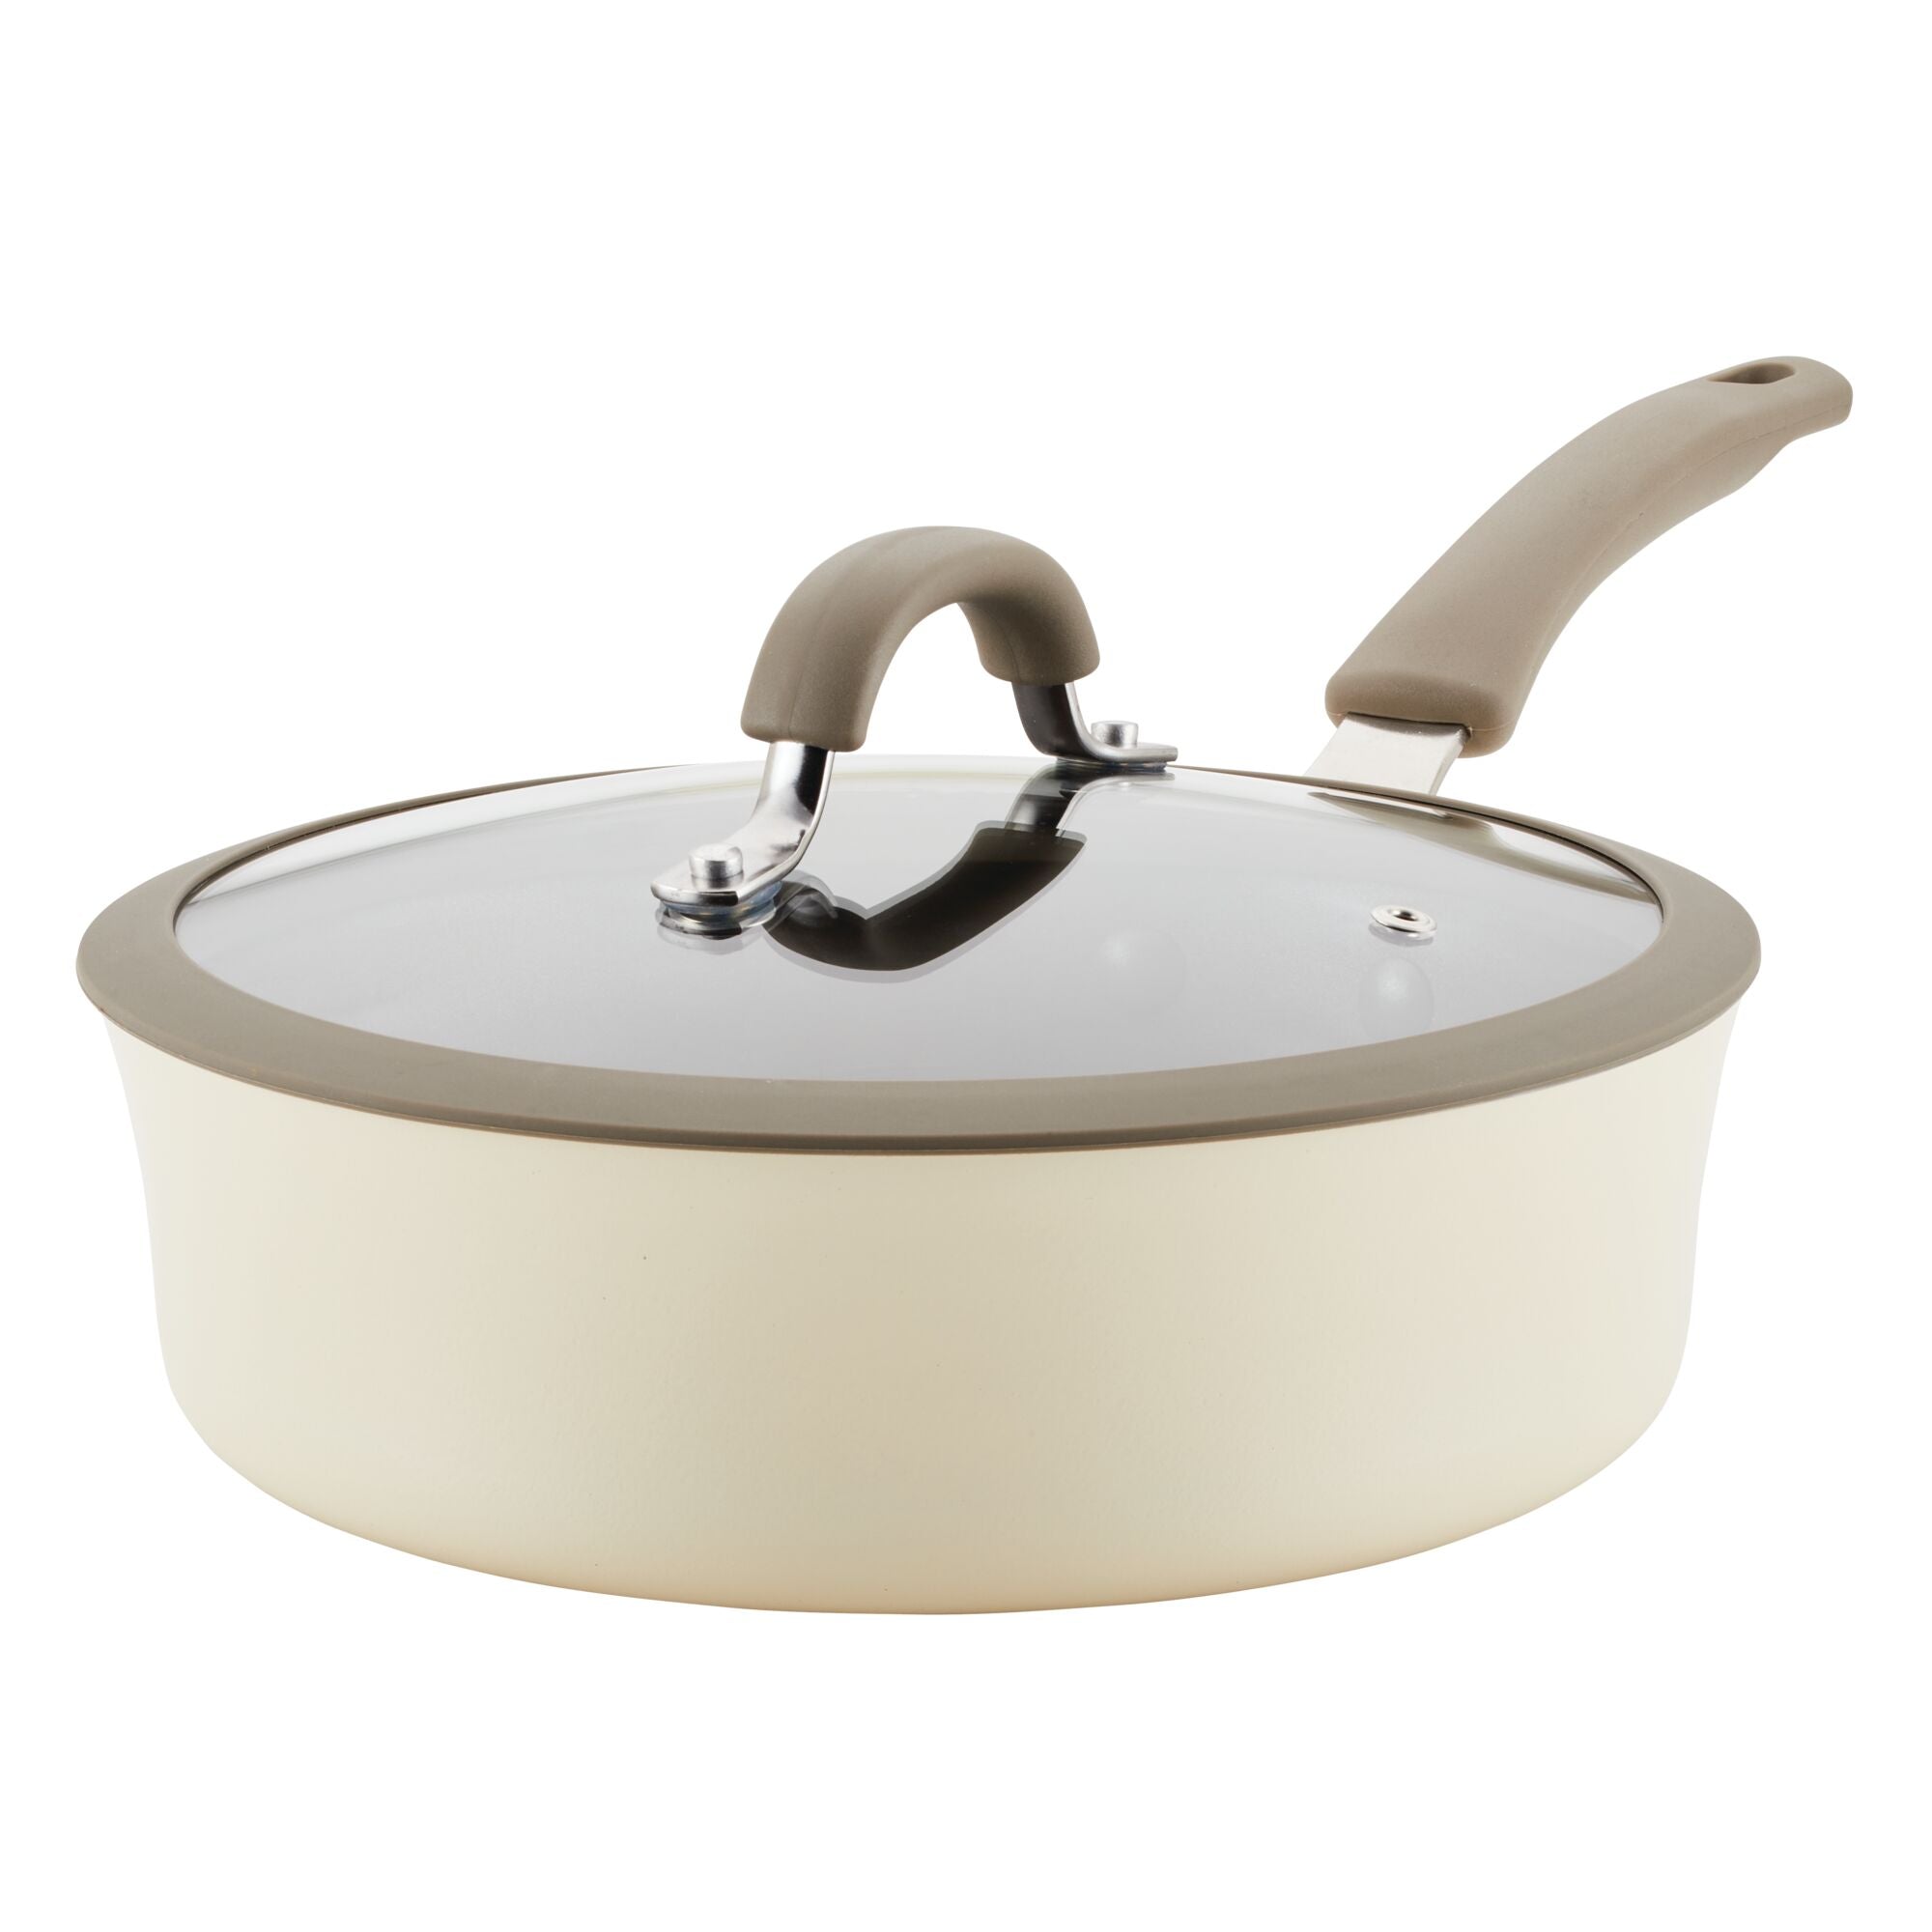 Tramontina Covered Sauce Pan Hard Anodized 3 Qt